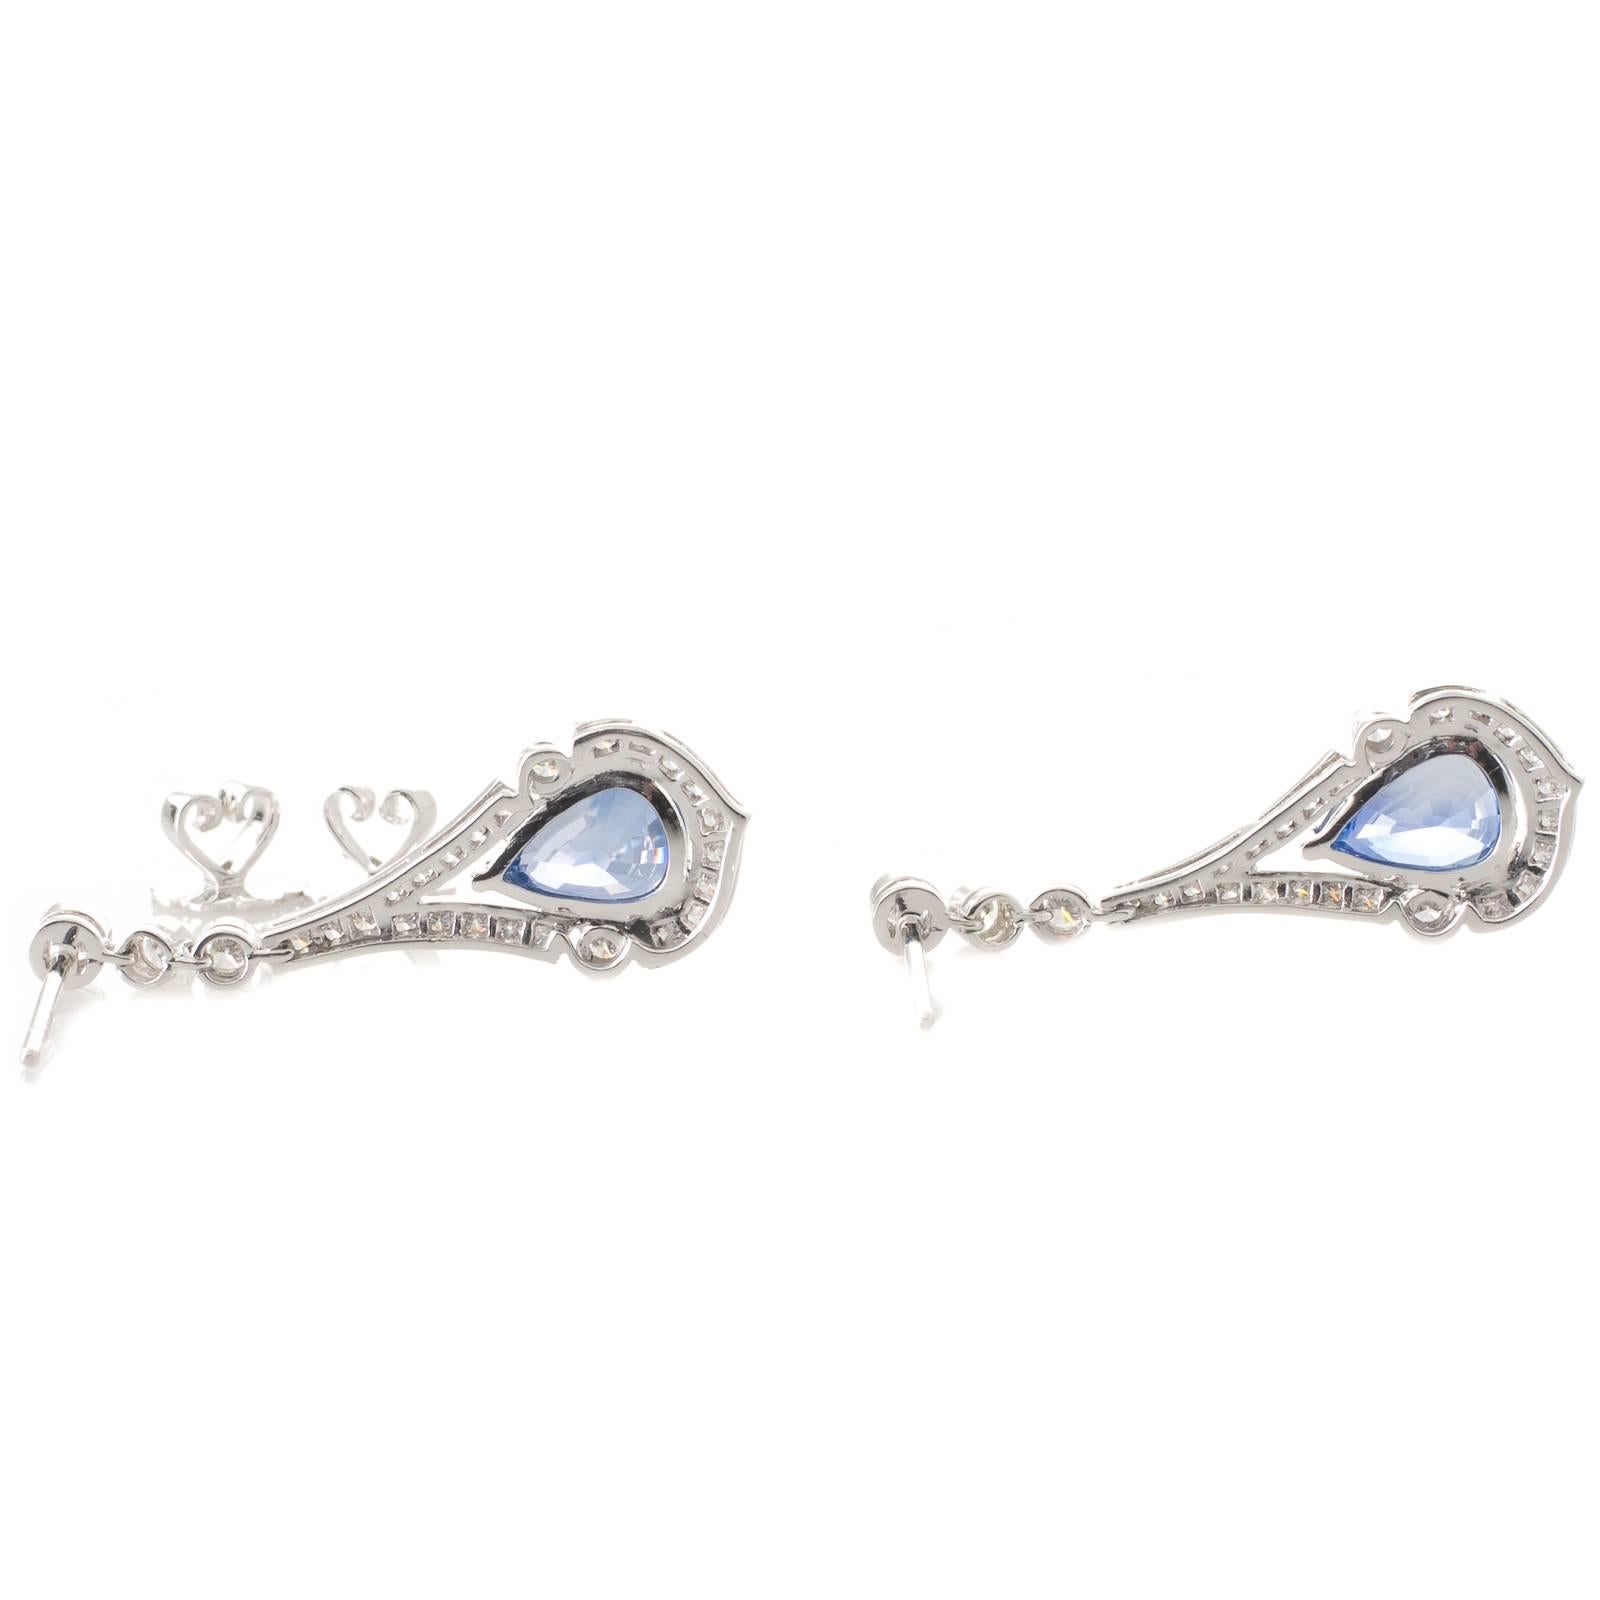 A pair of 18ct white gold drop earrings each with a pear shaped sapphire GIA certified as Sri Lankan in an arabesque styled surround which is grain set with brilliant cut diamonds and bezel set with a diamond to either side of the sapphire all